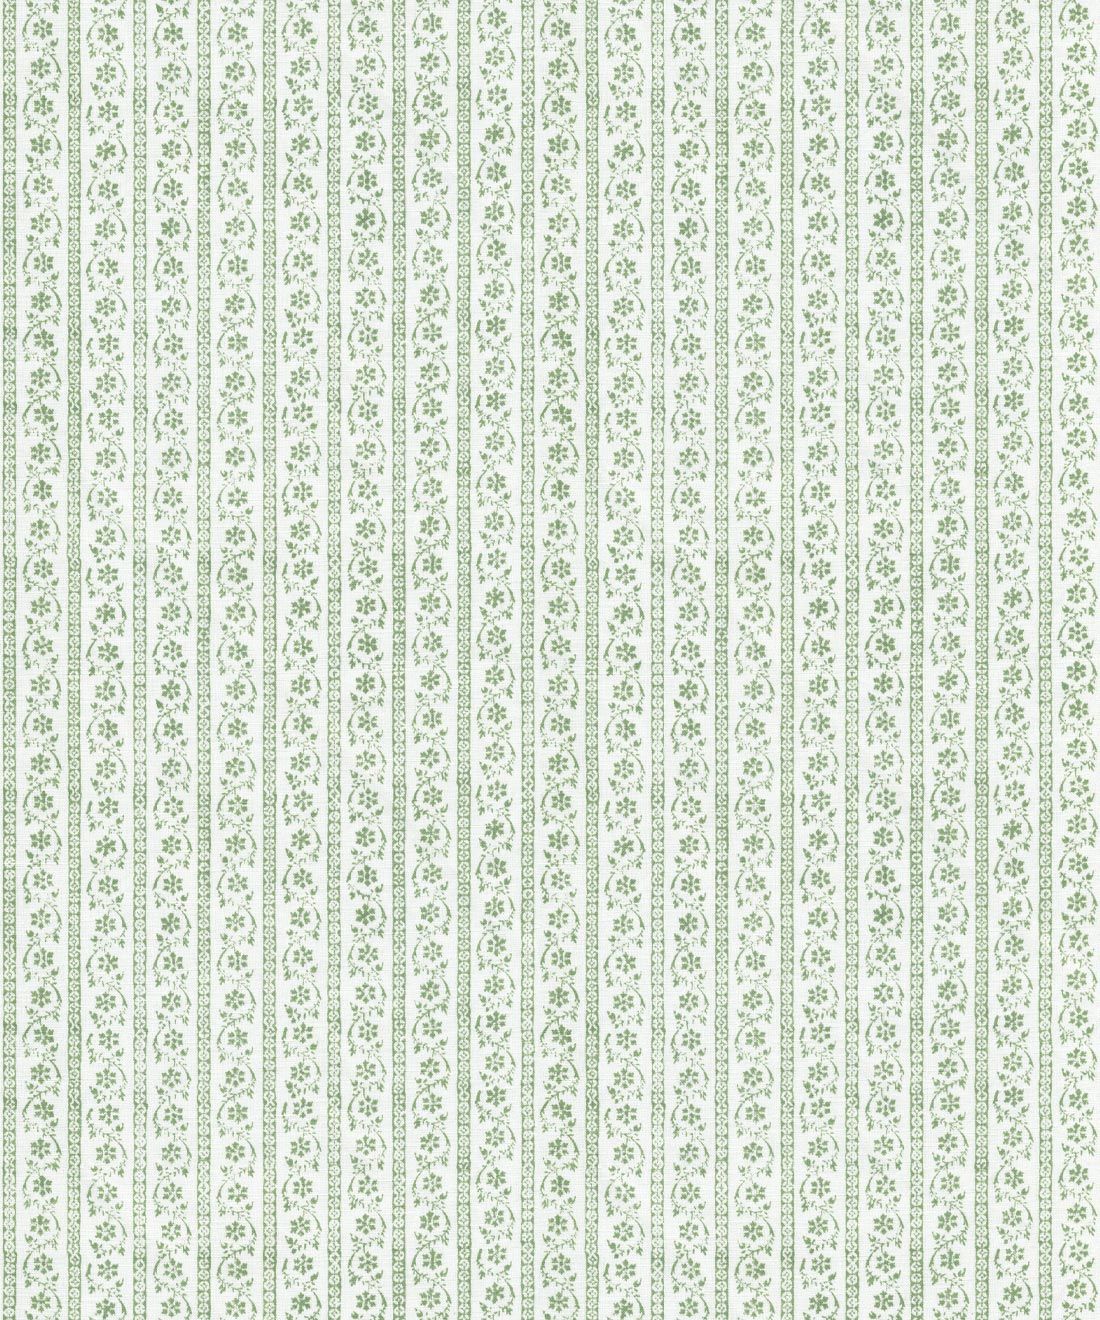 Daisy Chain Wallpaper • Mint Ivory • Swatch